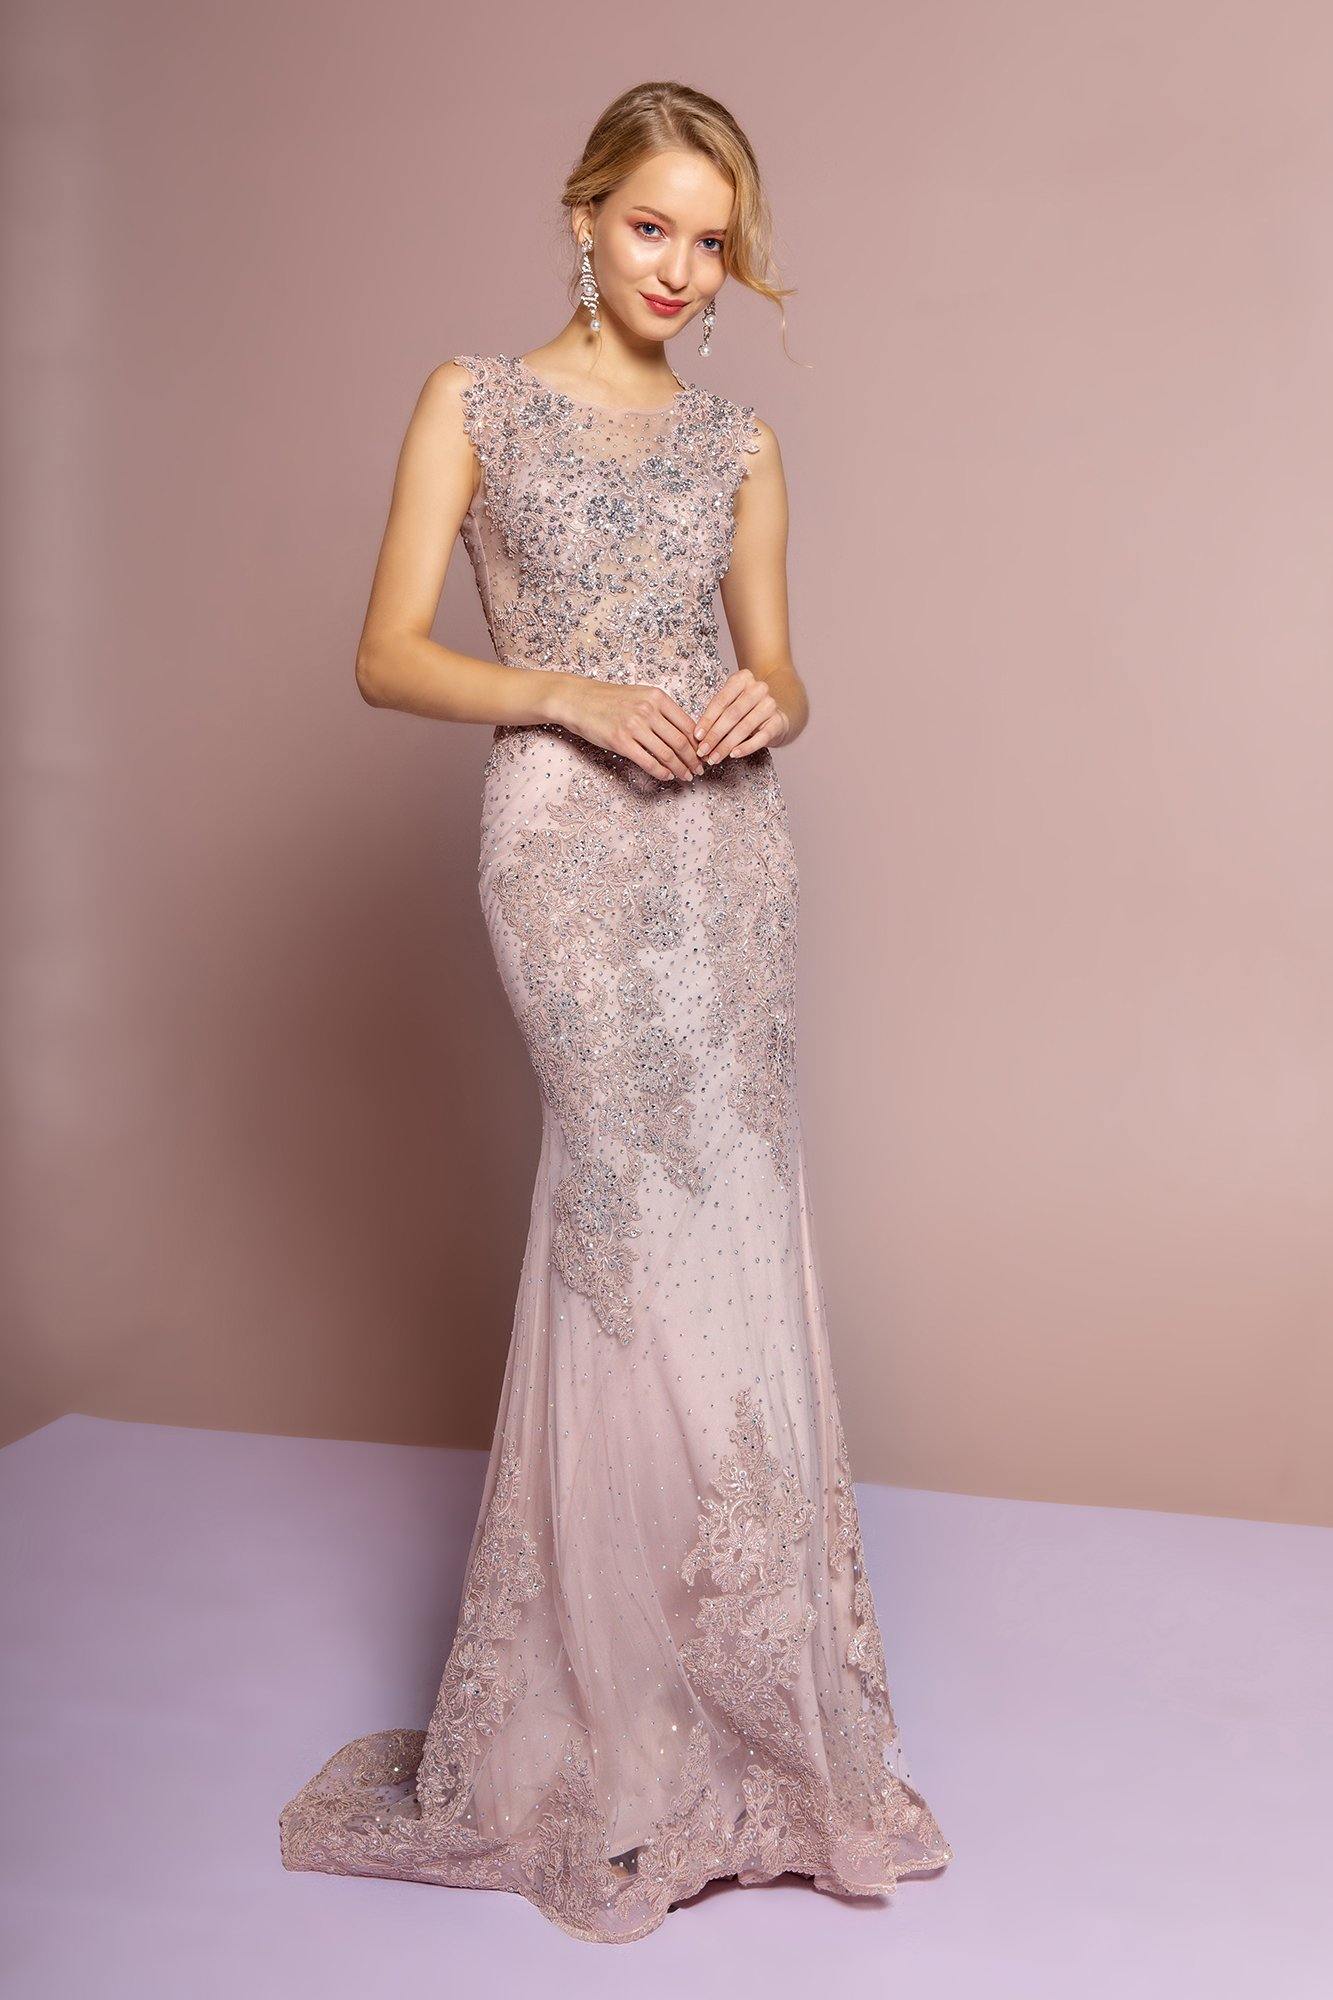 Long Fitted Prom Dress Sale - The Dress Outlet